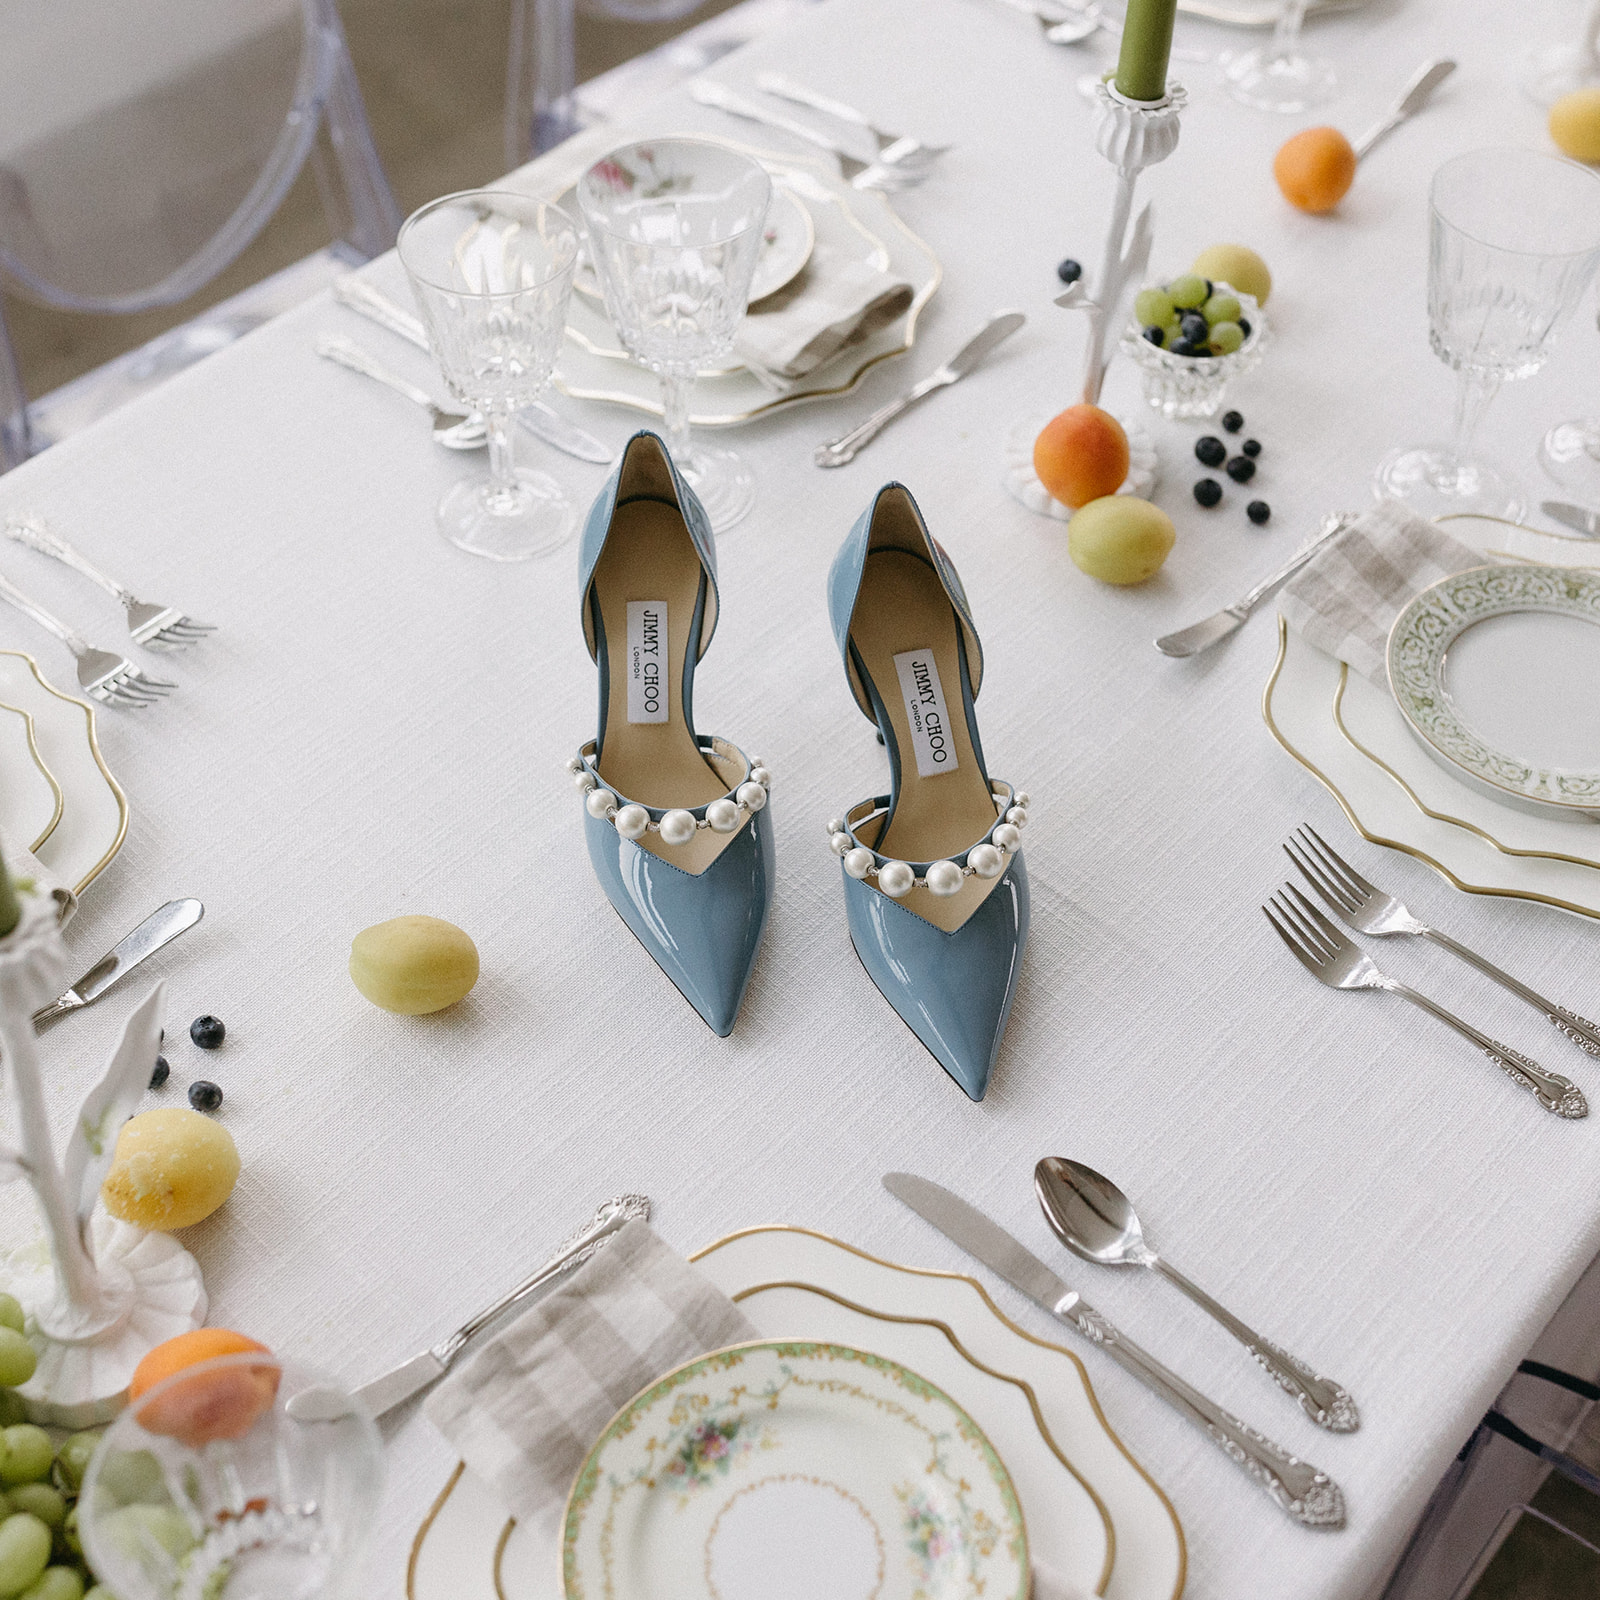 A styled garden party wedding tablescape featuring a linen tablecloth, citrus fruit, blue Jimmy Choo heels, and 